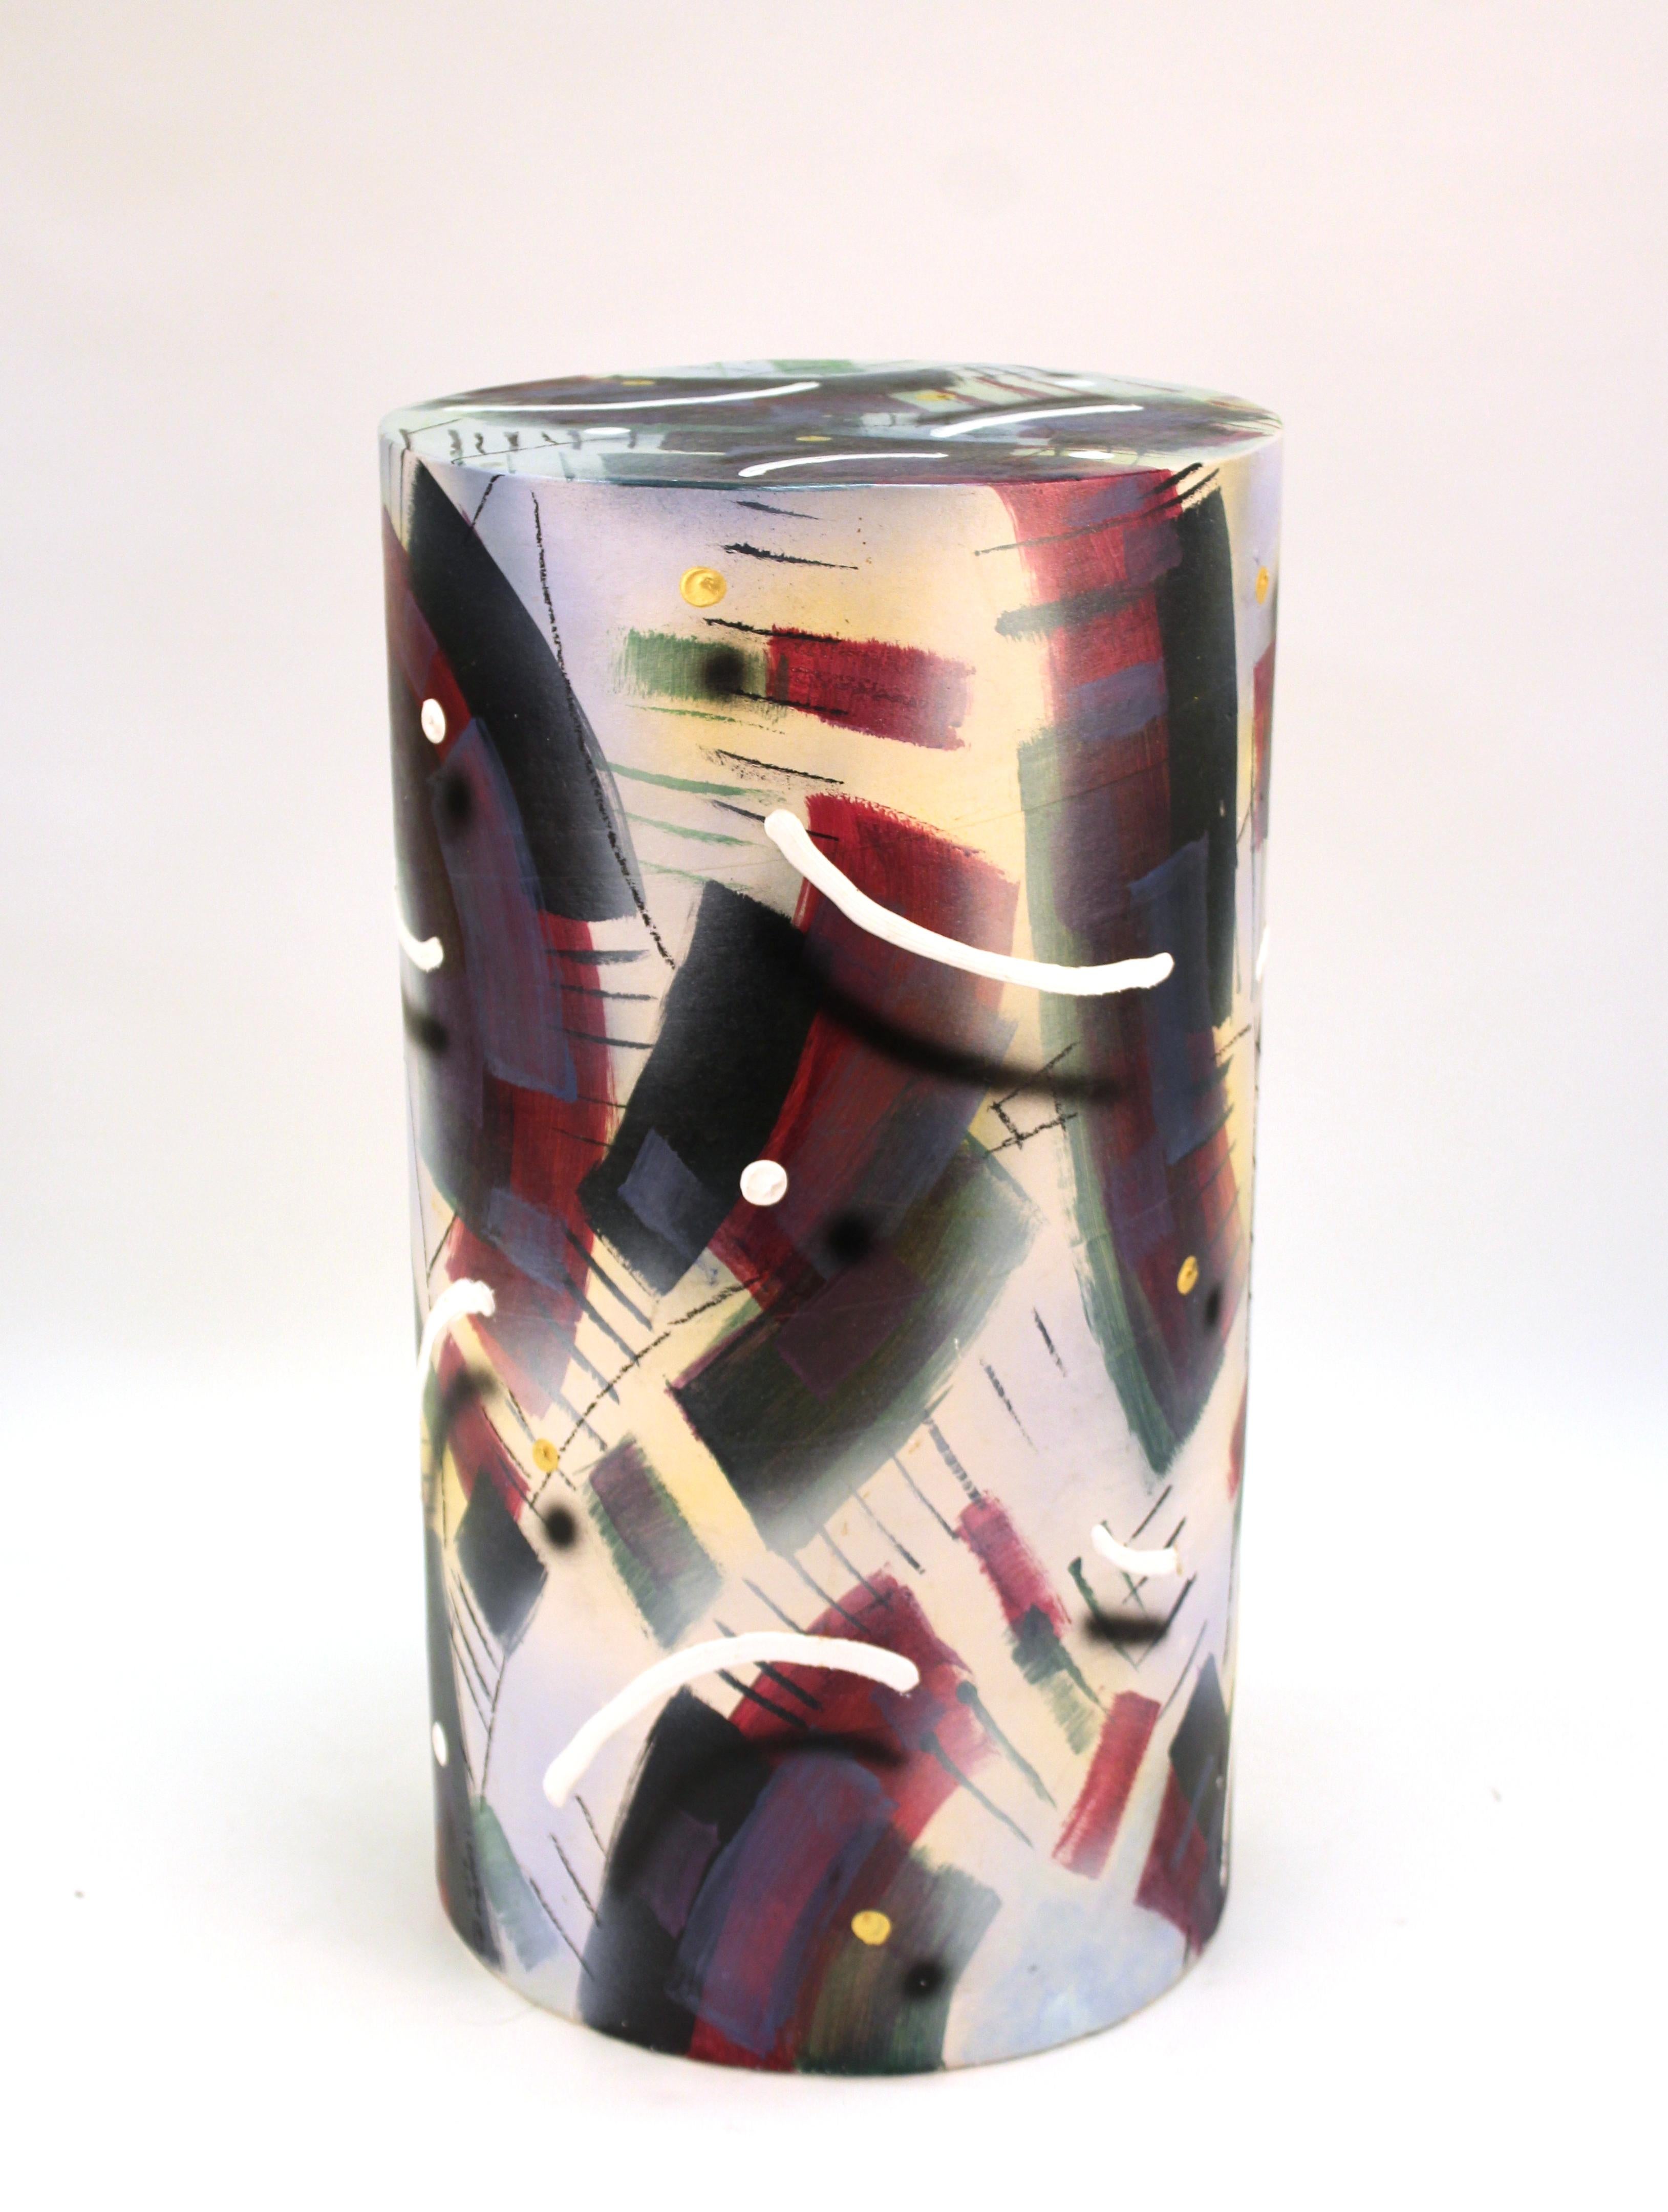 Memphis Group Postmodern ceramic hand-painted pedestal or side table with colorful geometric theme, signed twice on the lower edge. The piece was made during the 1990s and is in good vintage condition, with one small chip on the top edge. Some paint